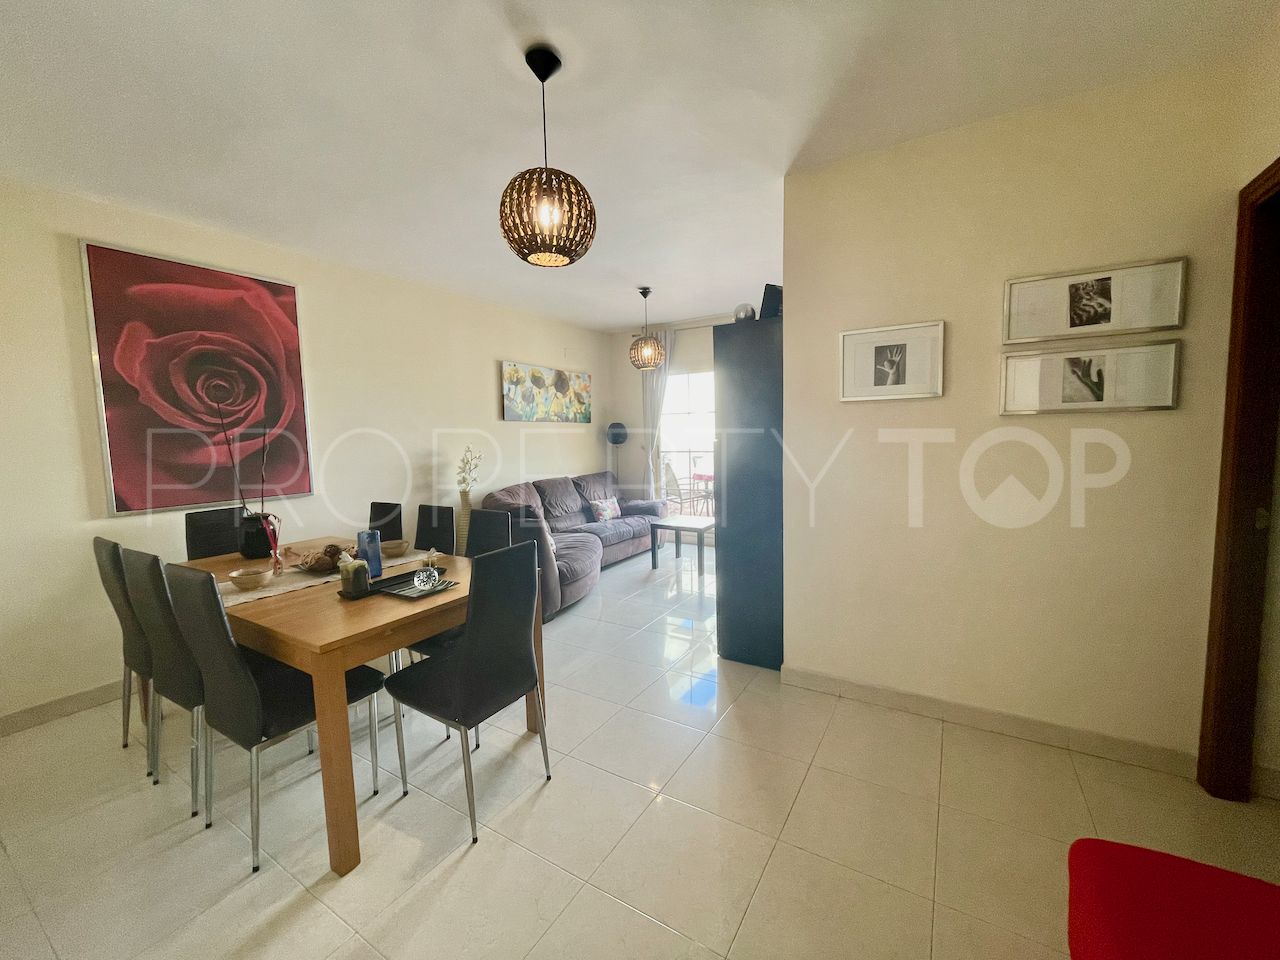 Duplex penthouse for sale in El Castillo with 3 bedrooms